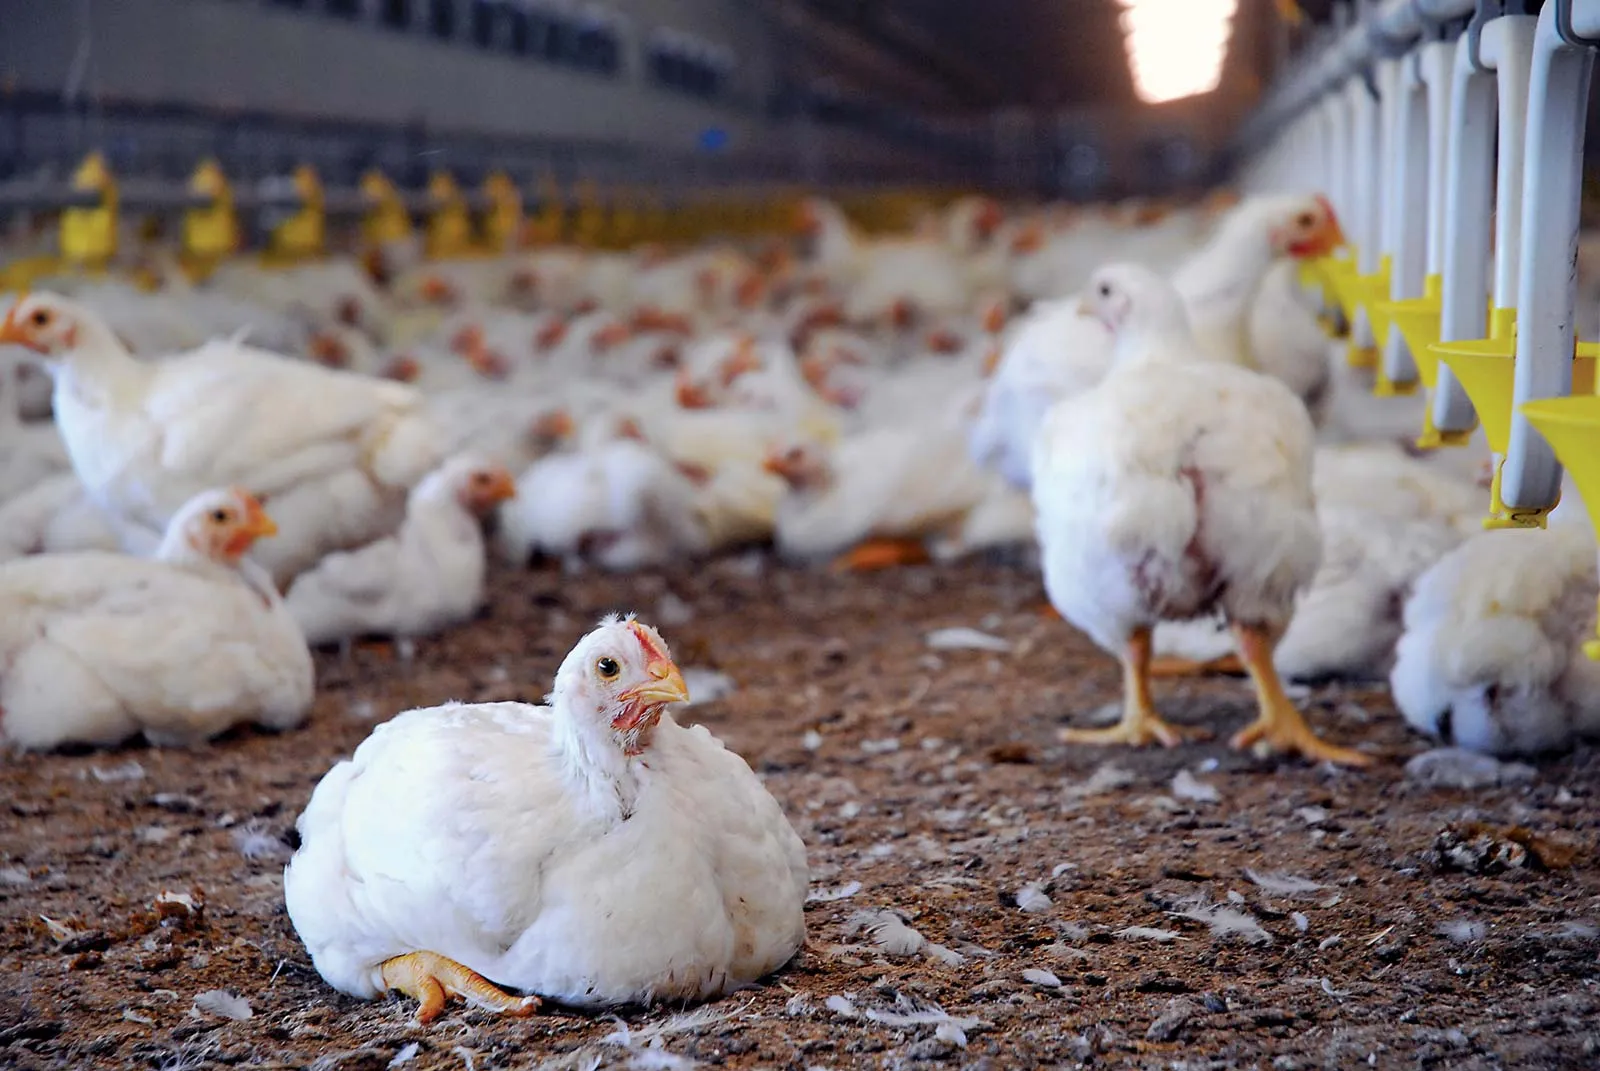 Poultry products manufacturing industry established